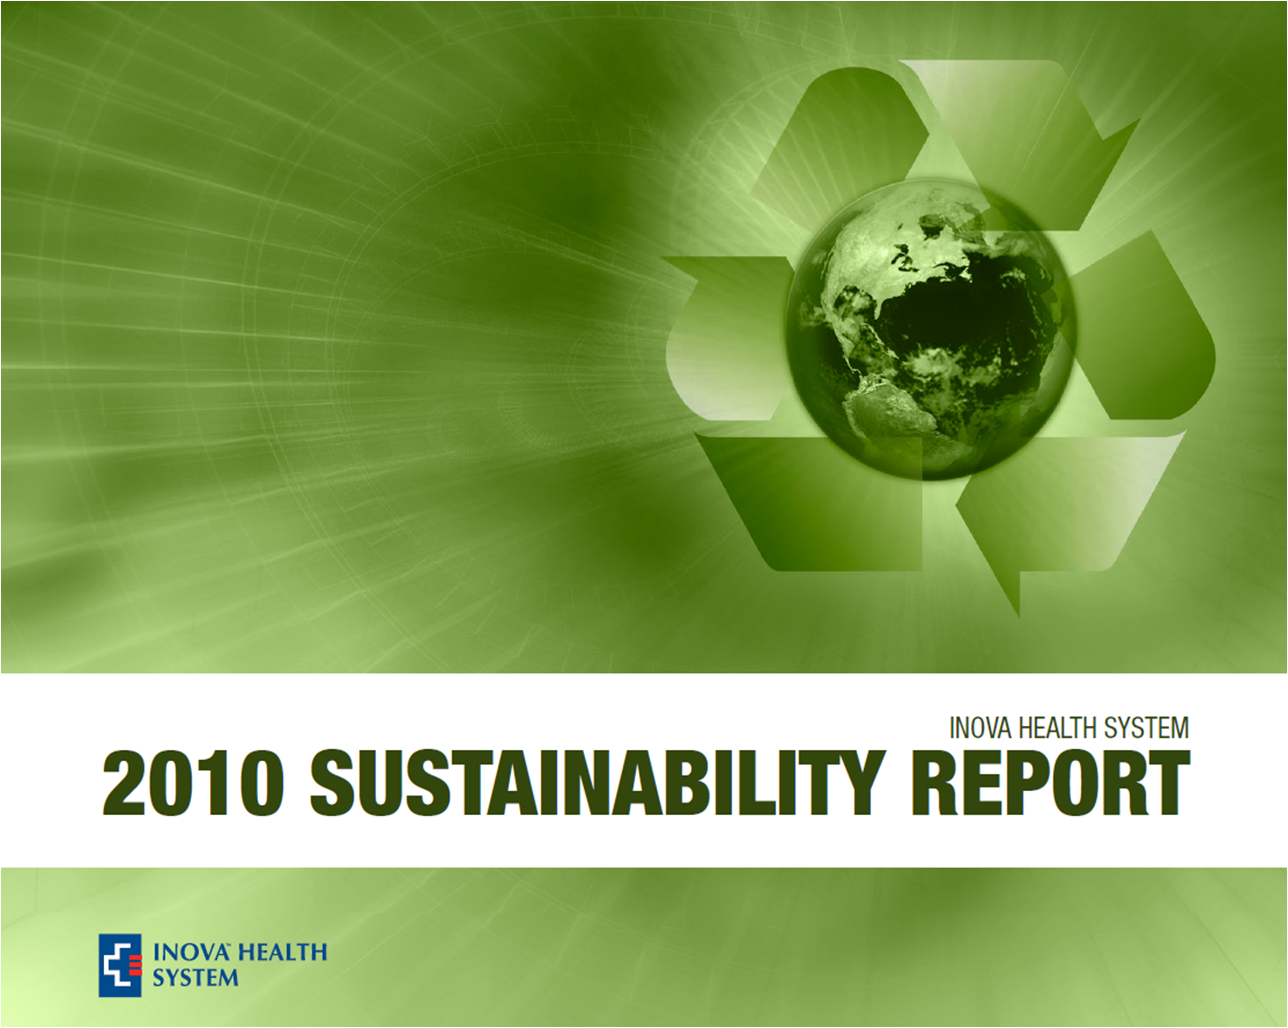 2010 Report cover: green light surrounding the recycling symbol with 3 arrows